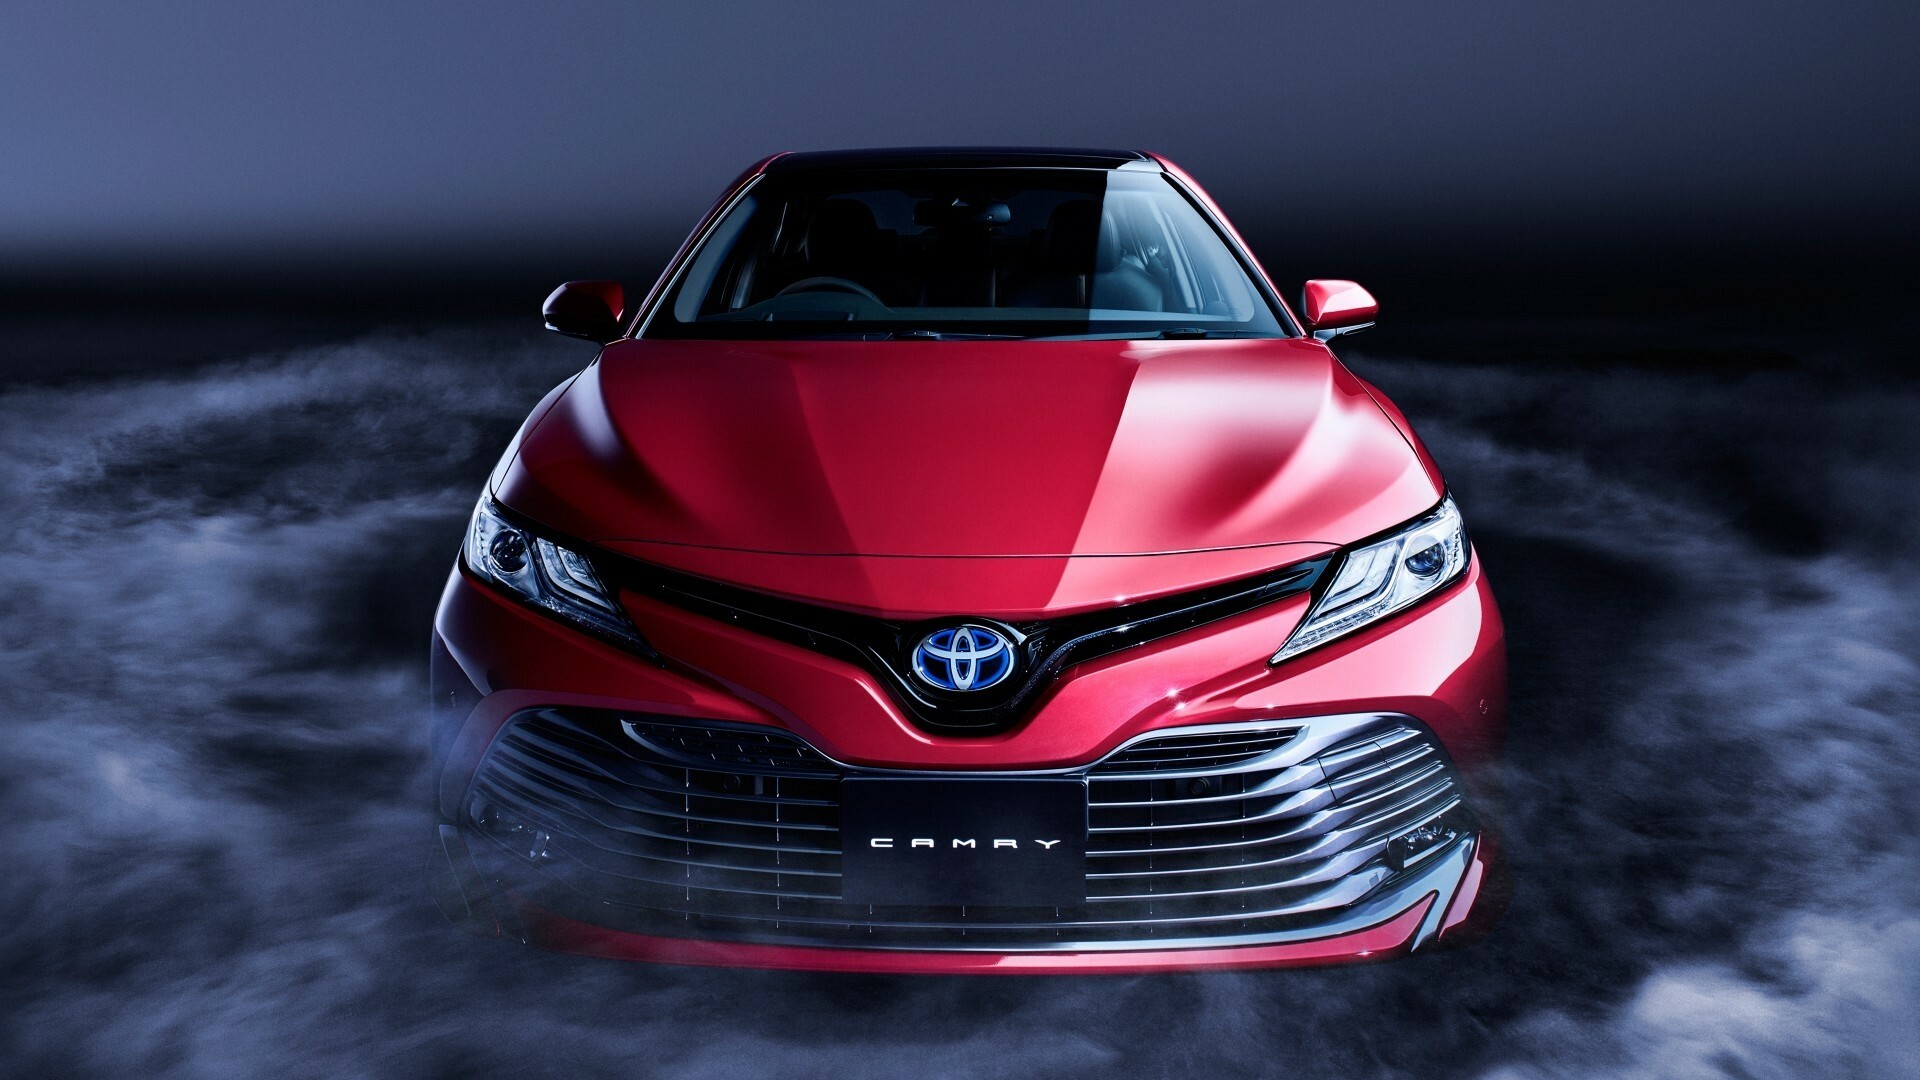 Toyota: It is among the world's 50 smartest companies, according to the MIT Technology Review. 1920x1080 Full HD Background.